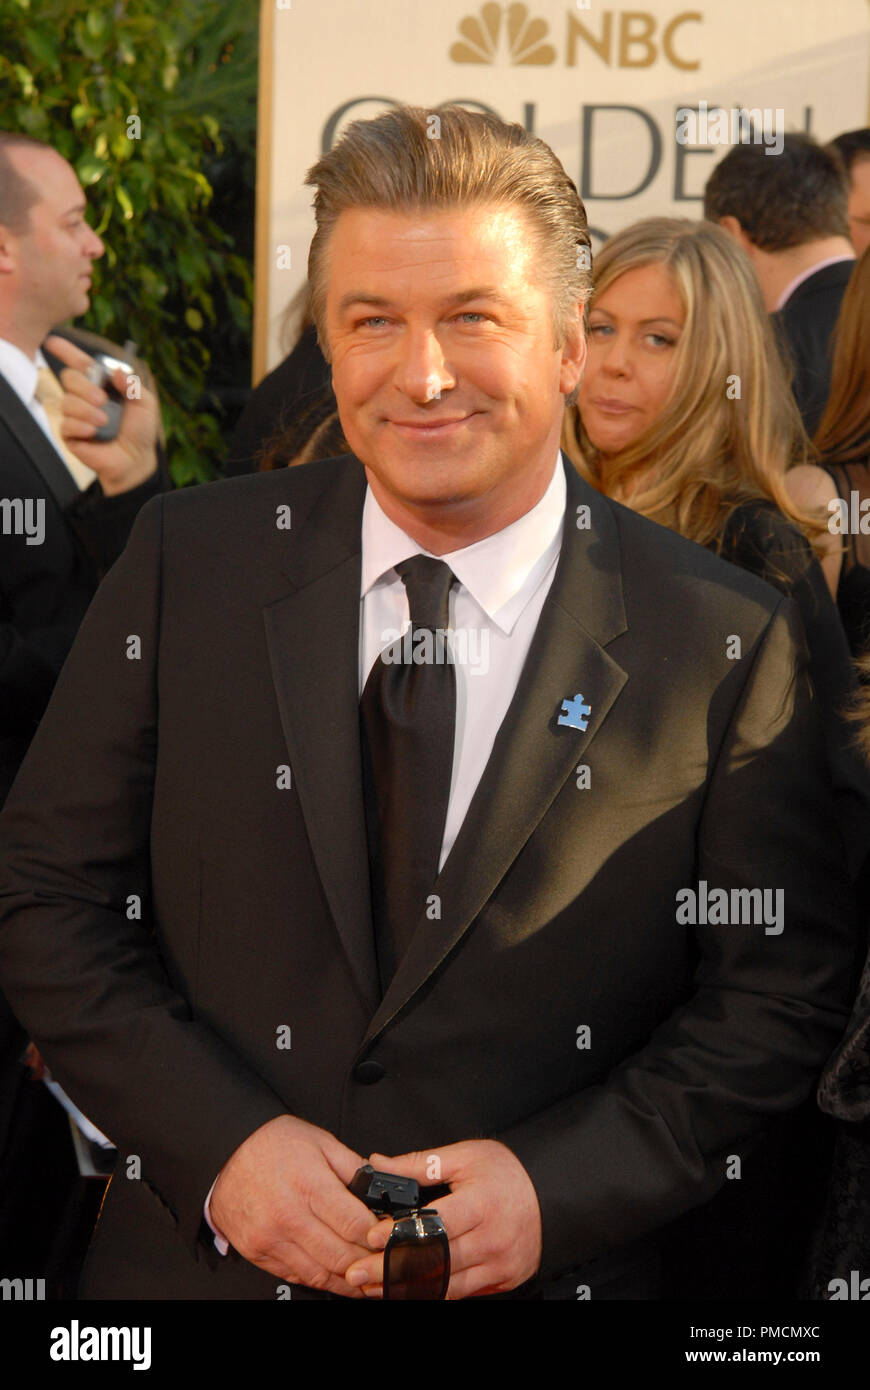 Hollywood Foreign Press Association presents the 2007 'Golden Globe Awards - 64th Annual' (Arrivals) Alec Baldwin 1-15-07 Stock Photo